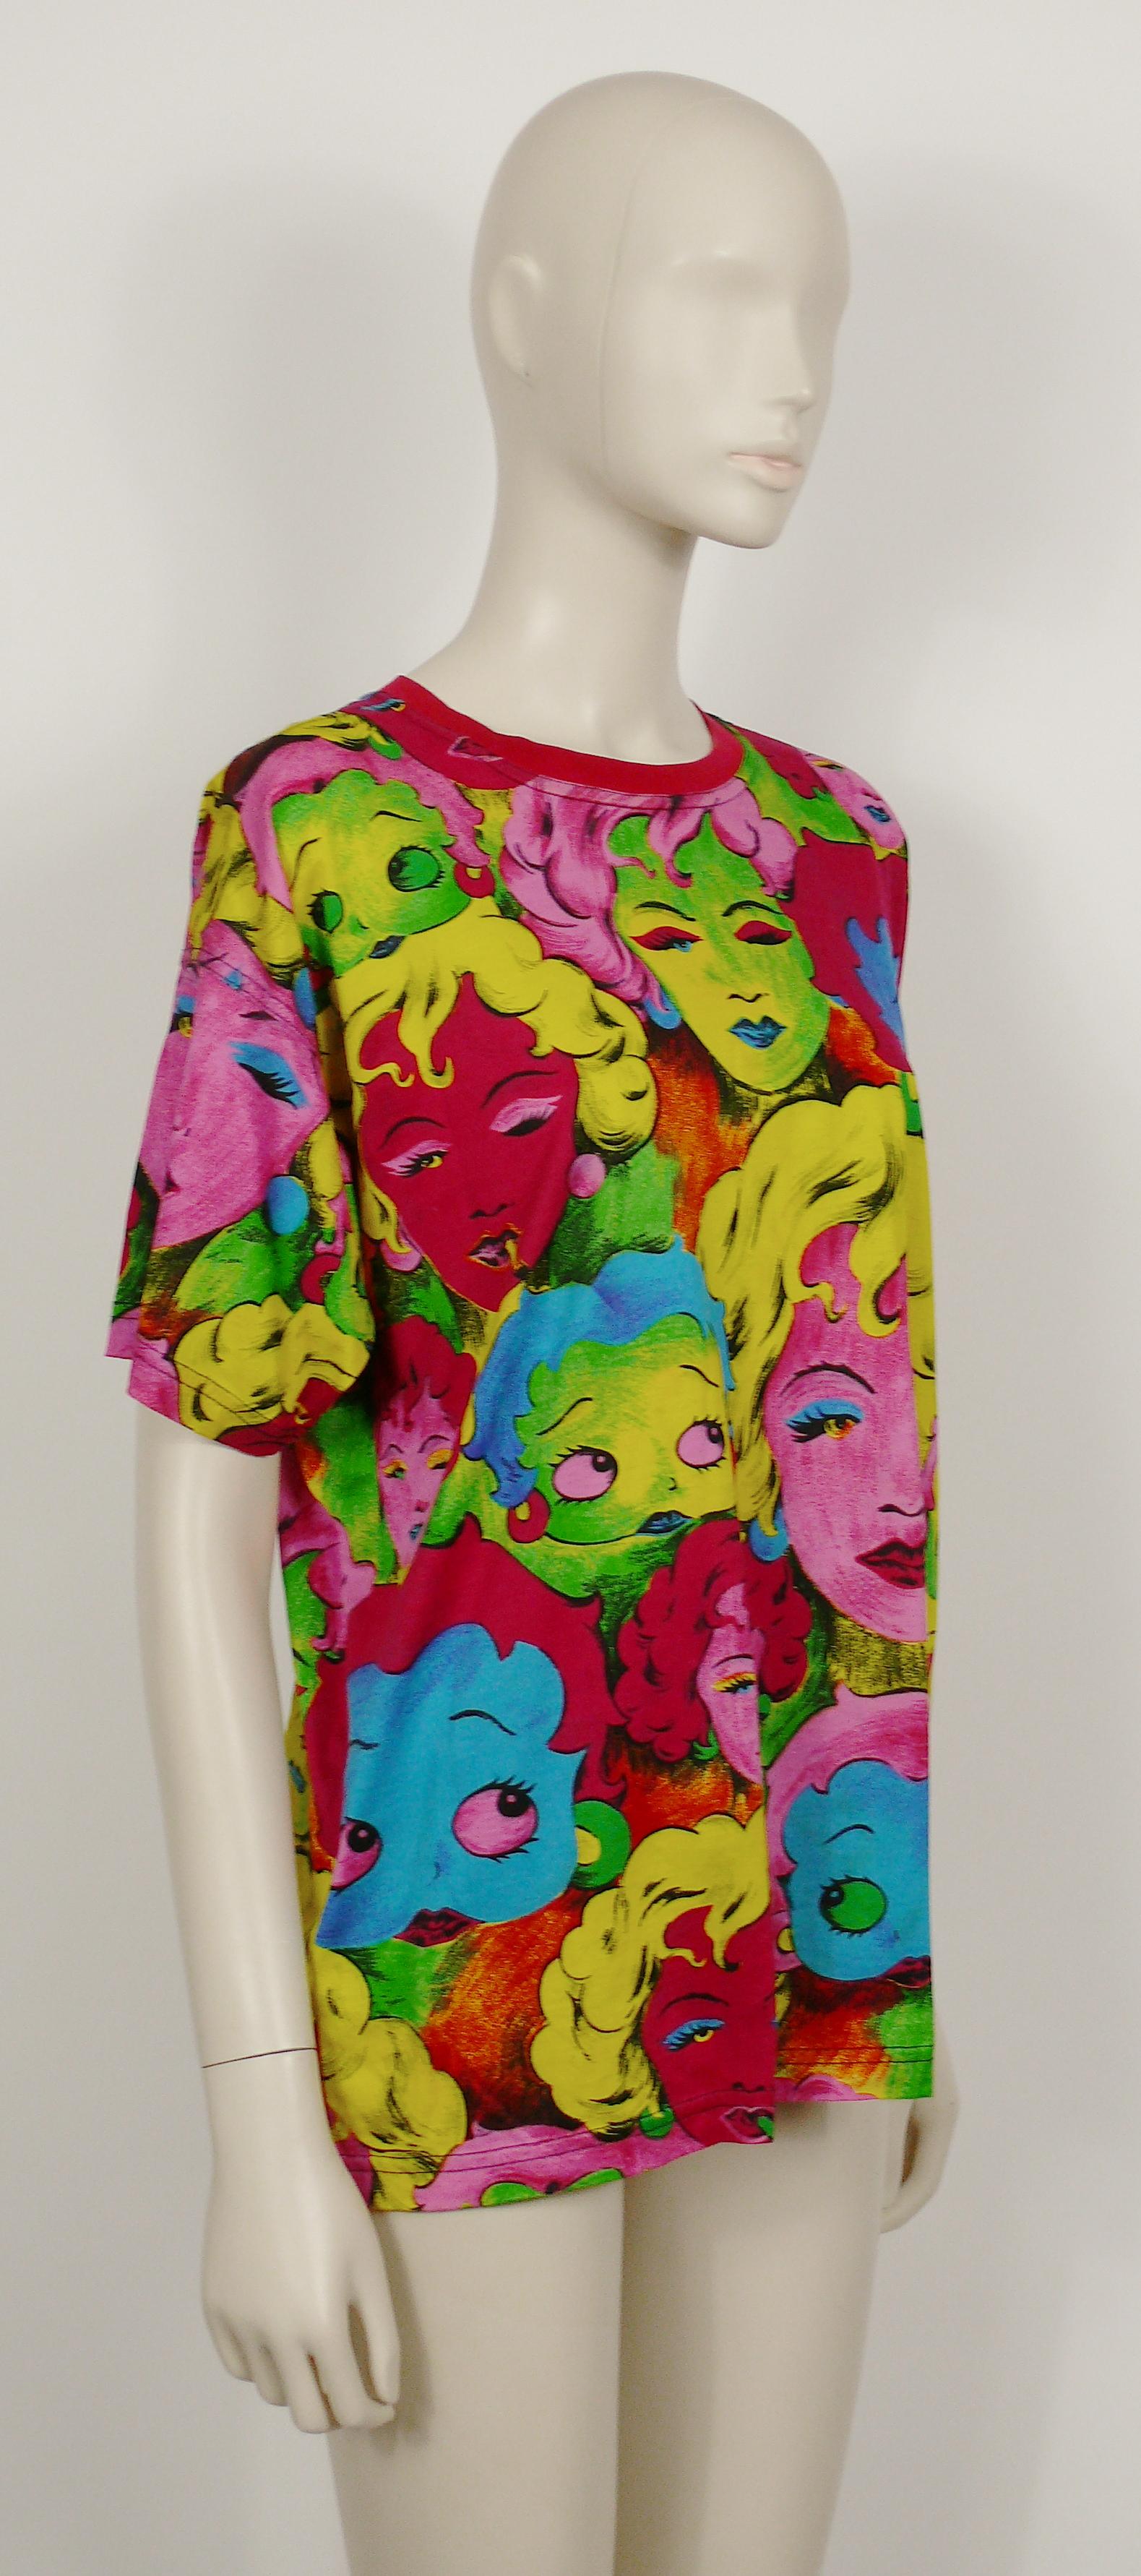 VERSACE JEANS COUTURE vintage rare t-shirt featuring ANDY WARHOL's style portrait prints in vibrant colors of MARYILYN MONROE and BETTY BOOP all over.

Spring/Summer 1991 Collection.

Label reads VERSACE JEANS COUTURE.
Made in Italy

Composition